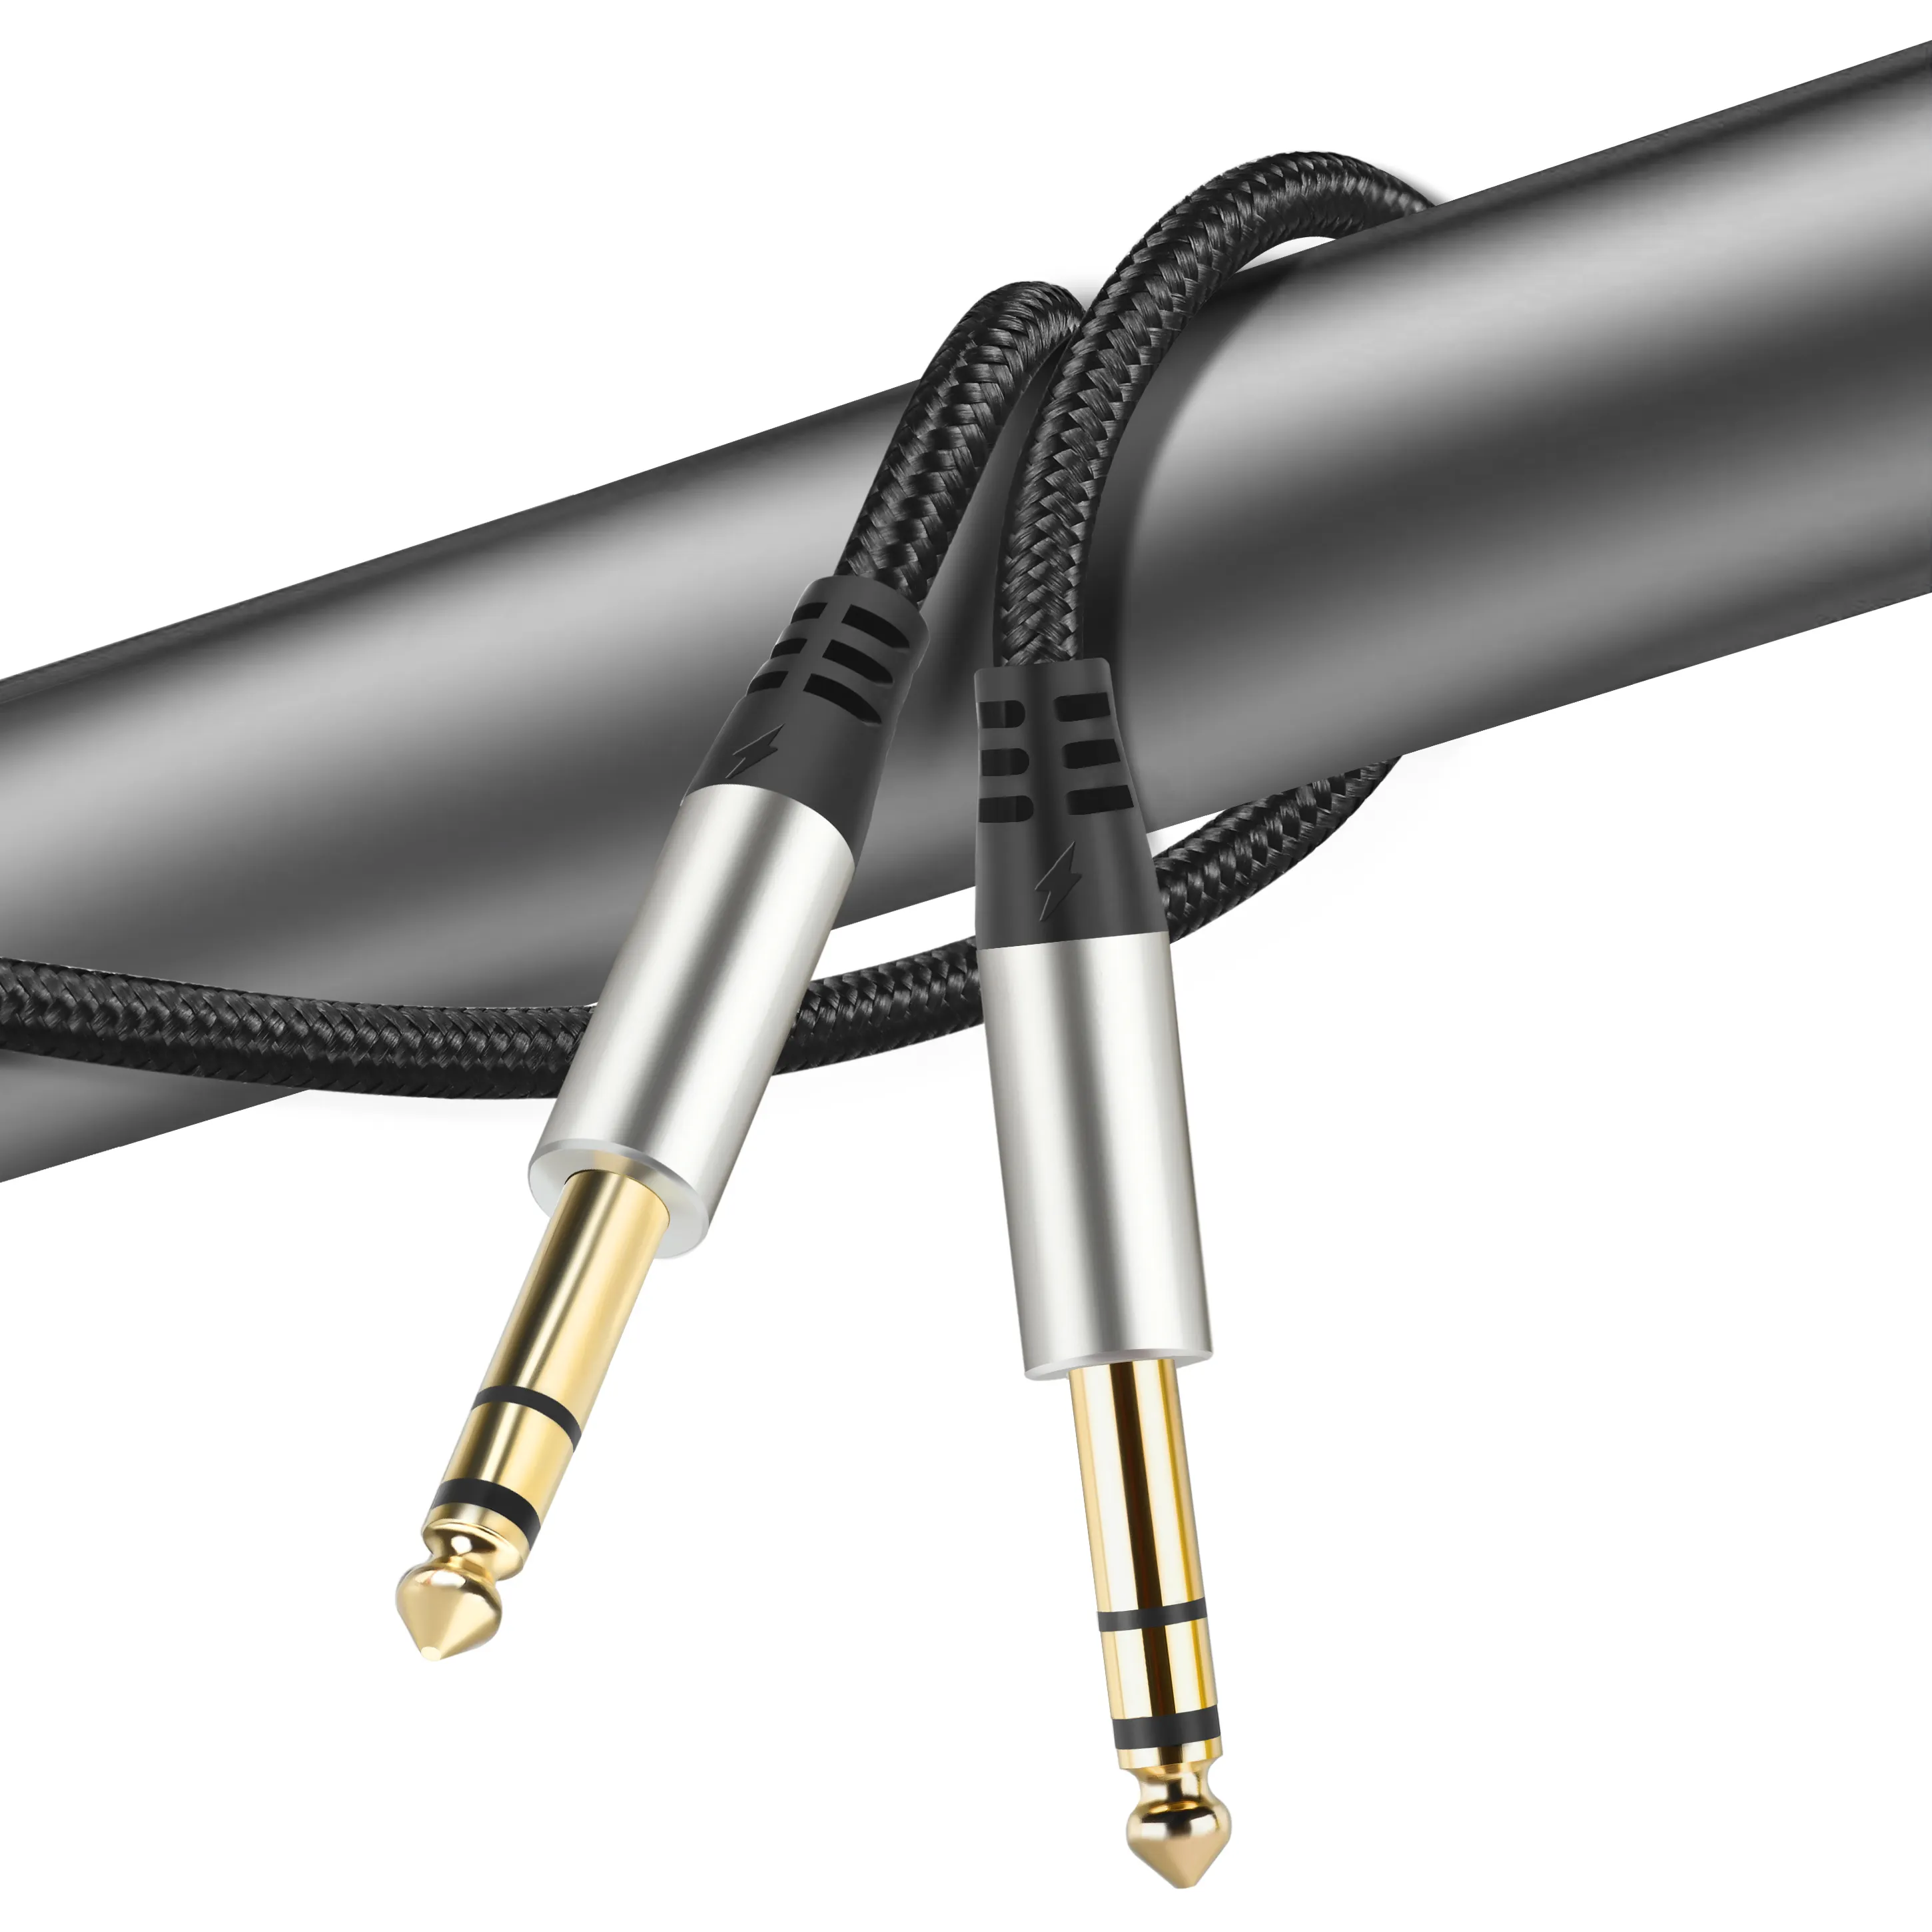 High quality 6.5mm Audio Cable Guitar Instrument Cable for microphone/ Instrument Cable 1/4 Inch